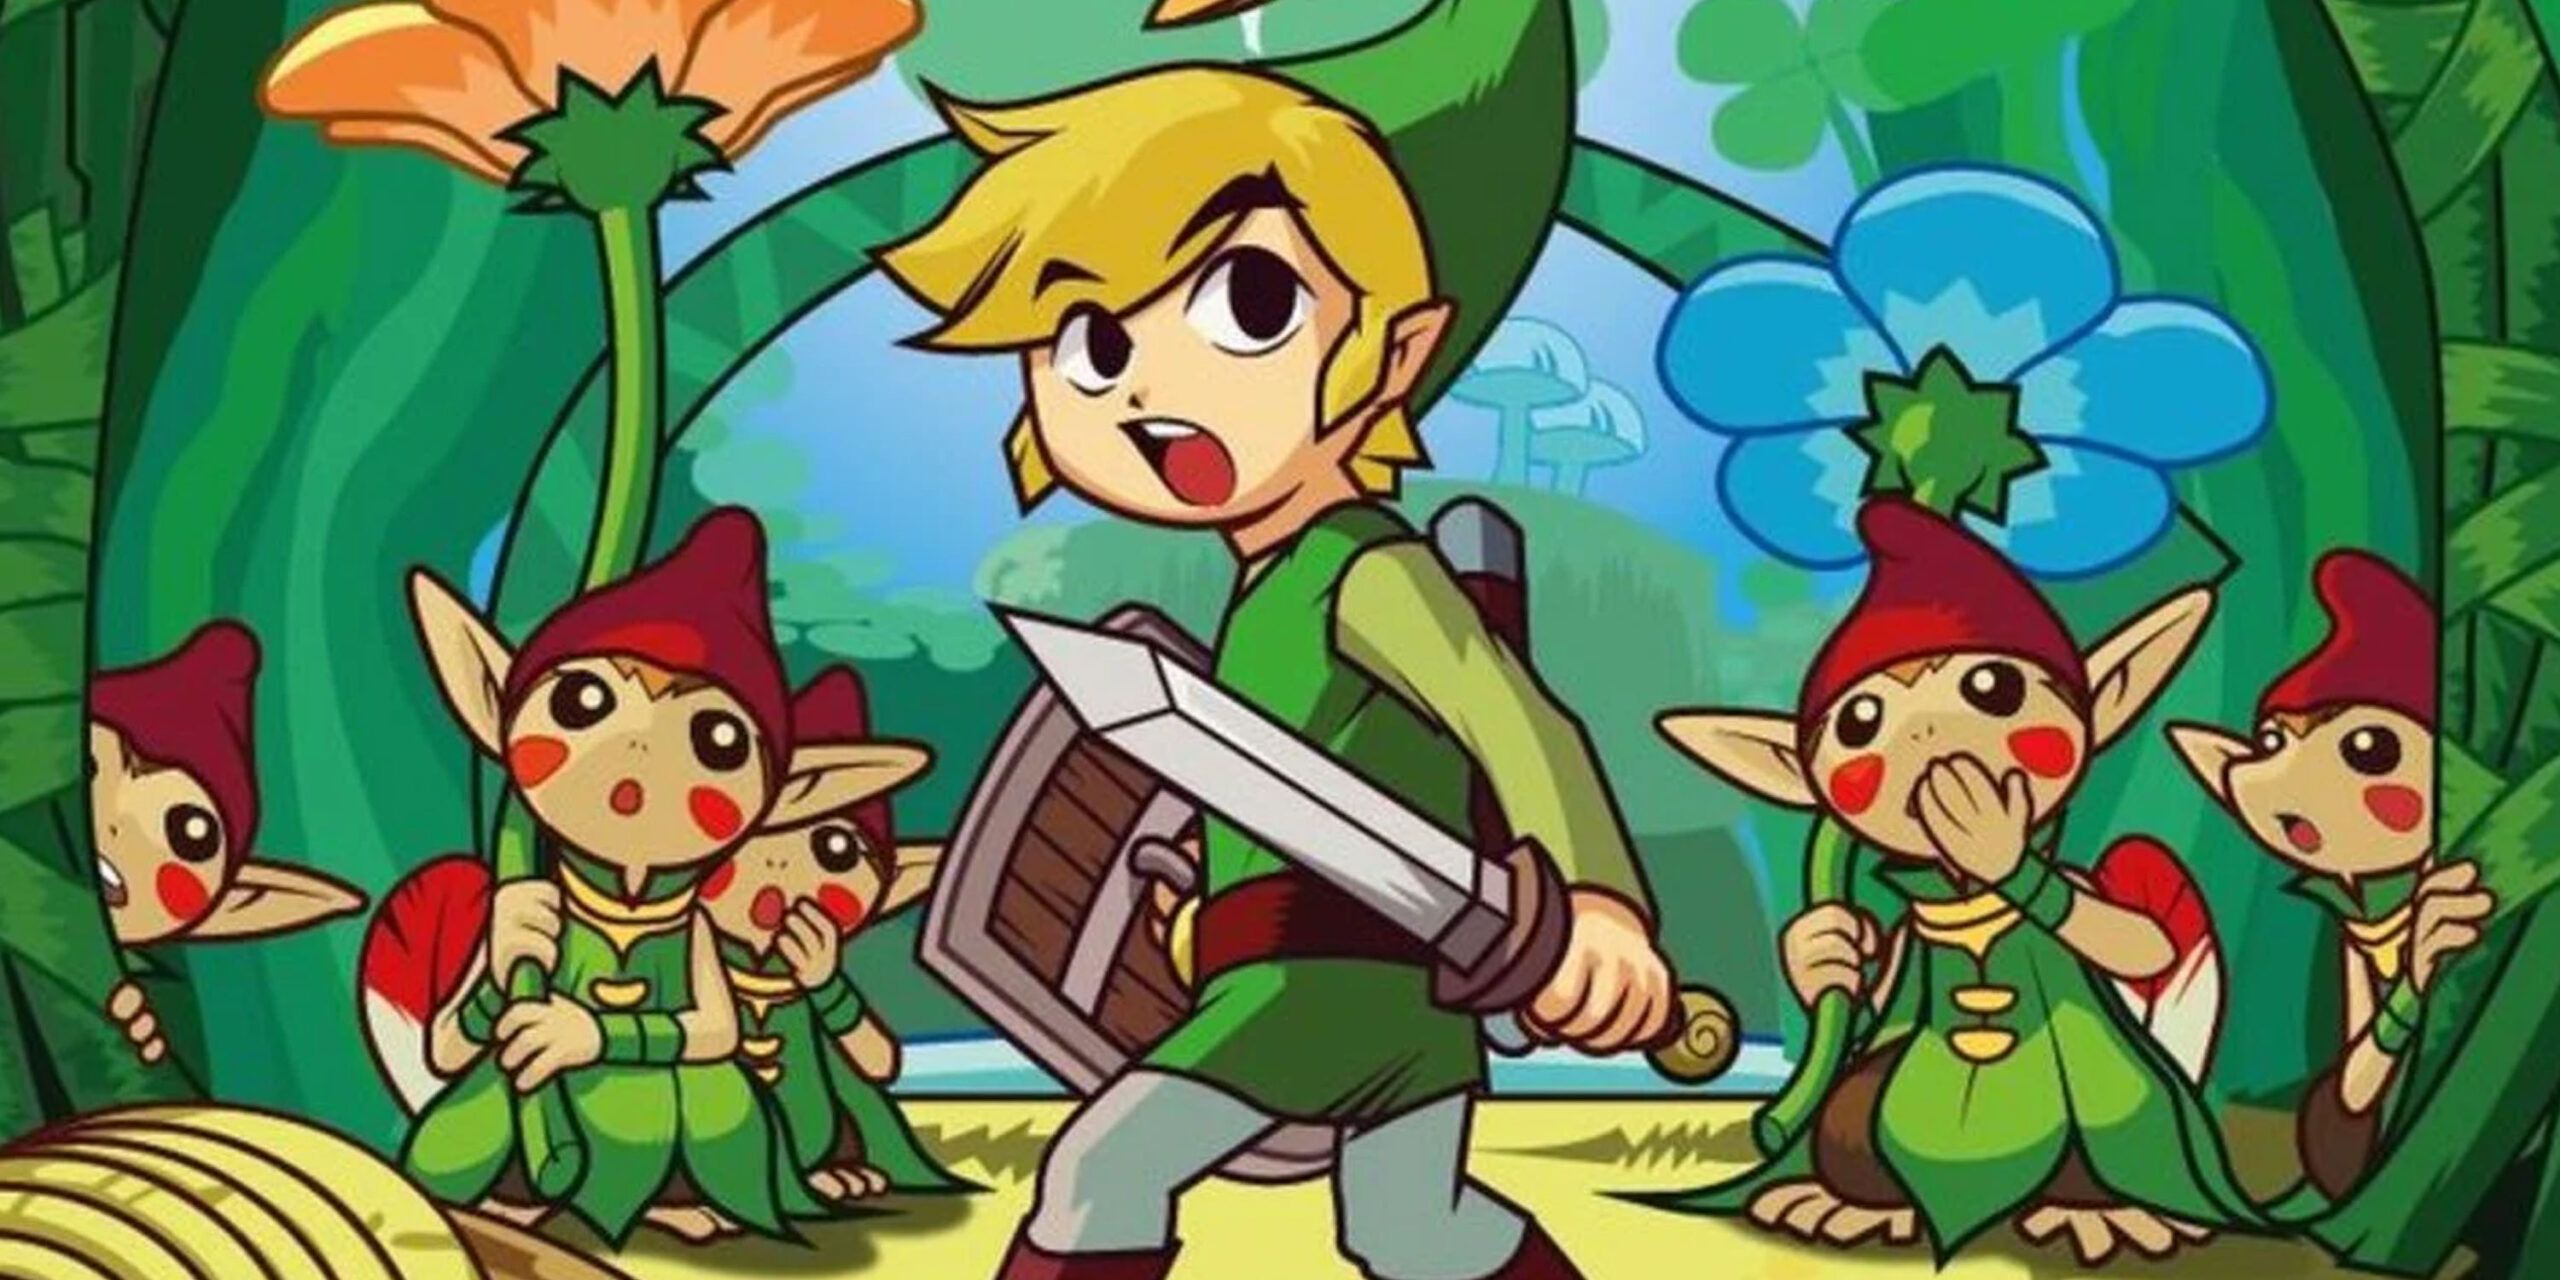 Link surrounded by the Minish